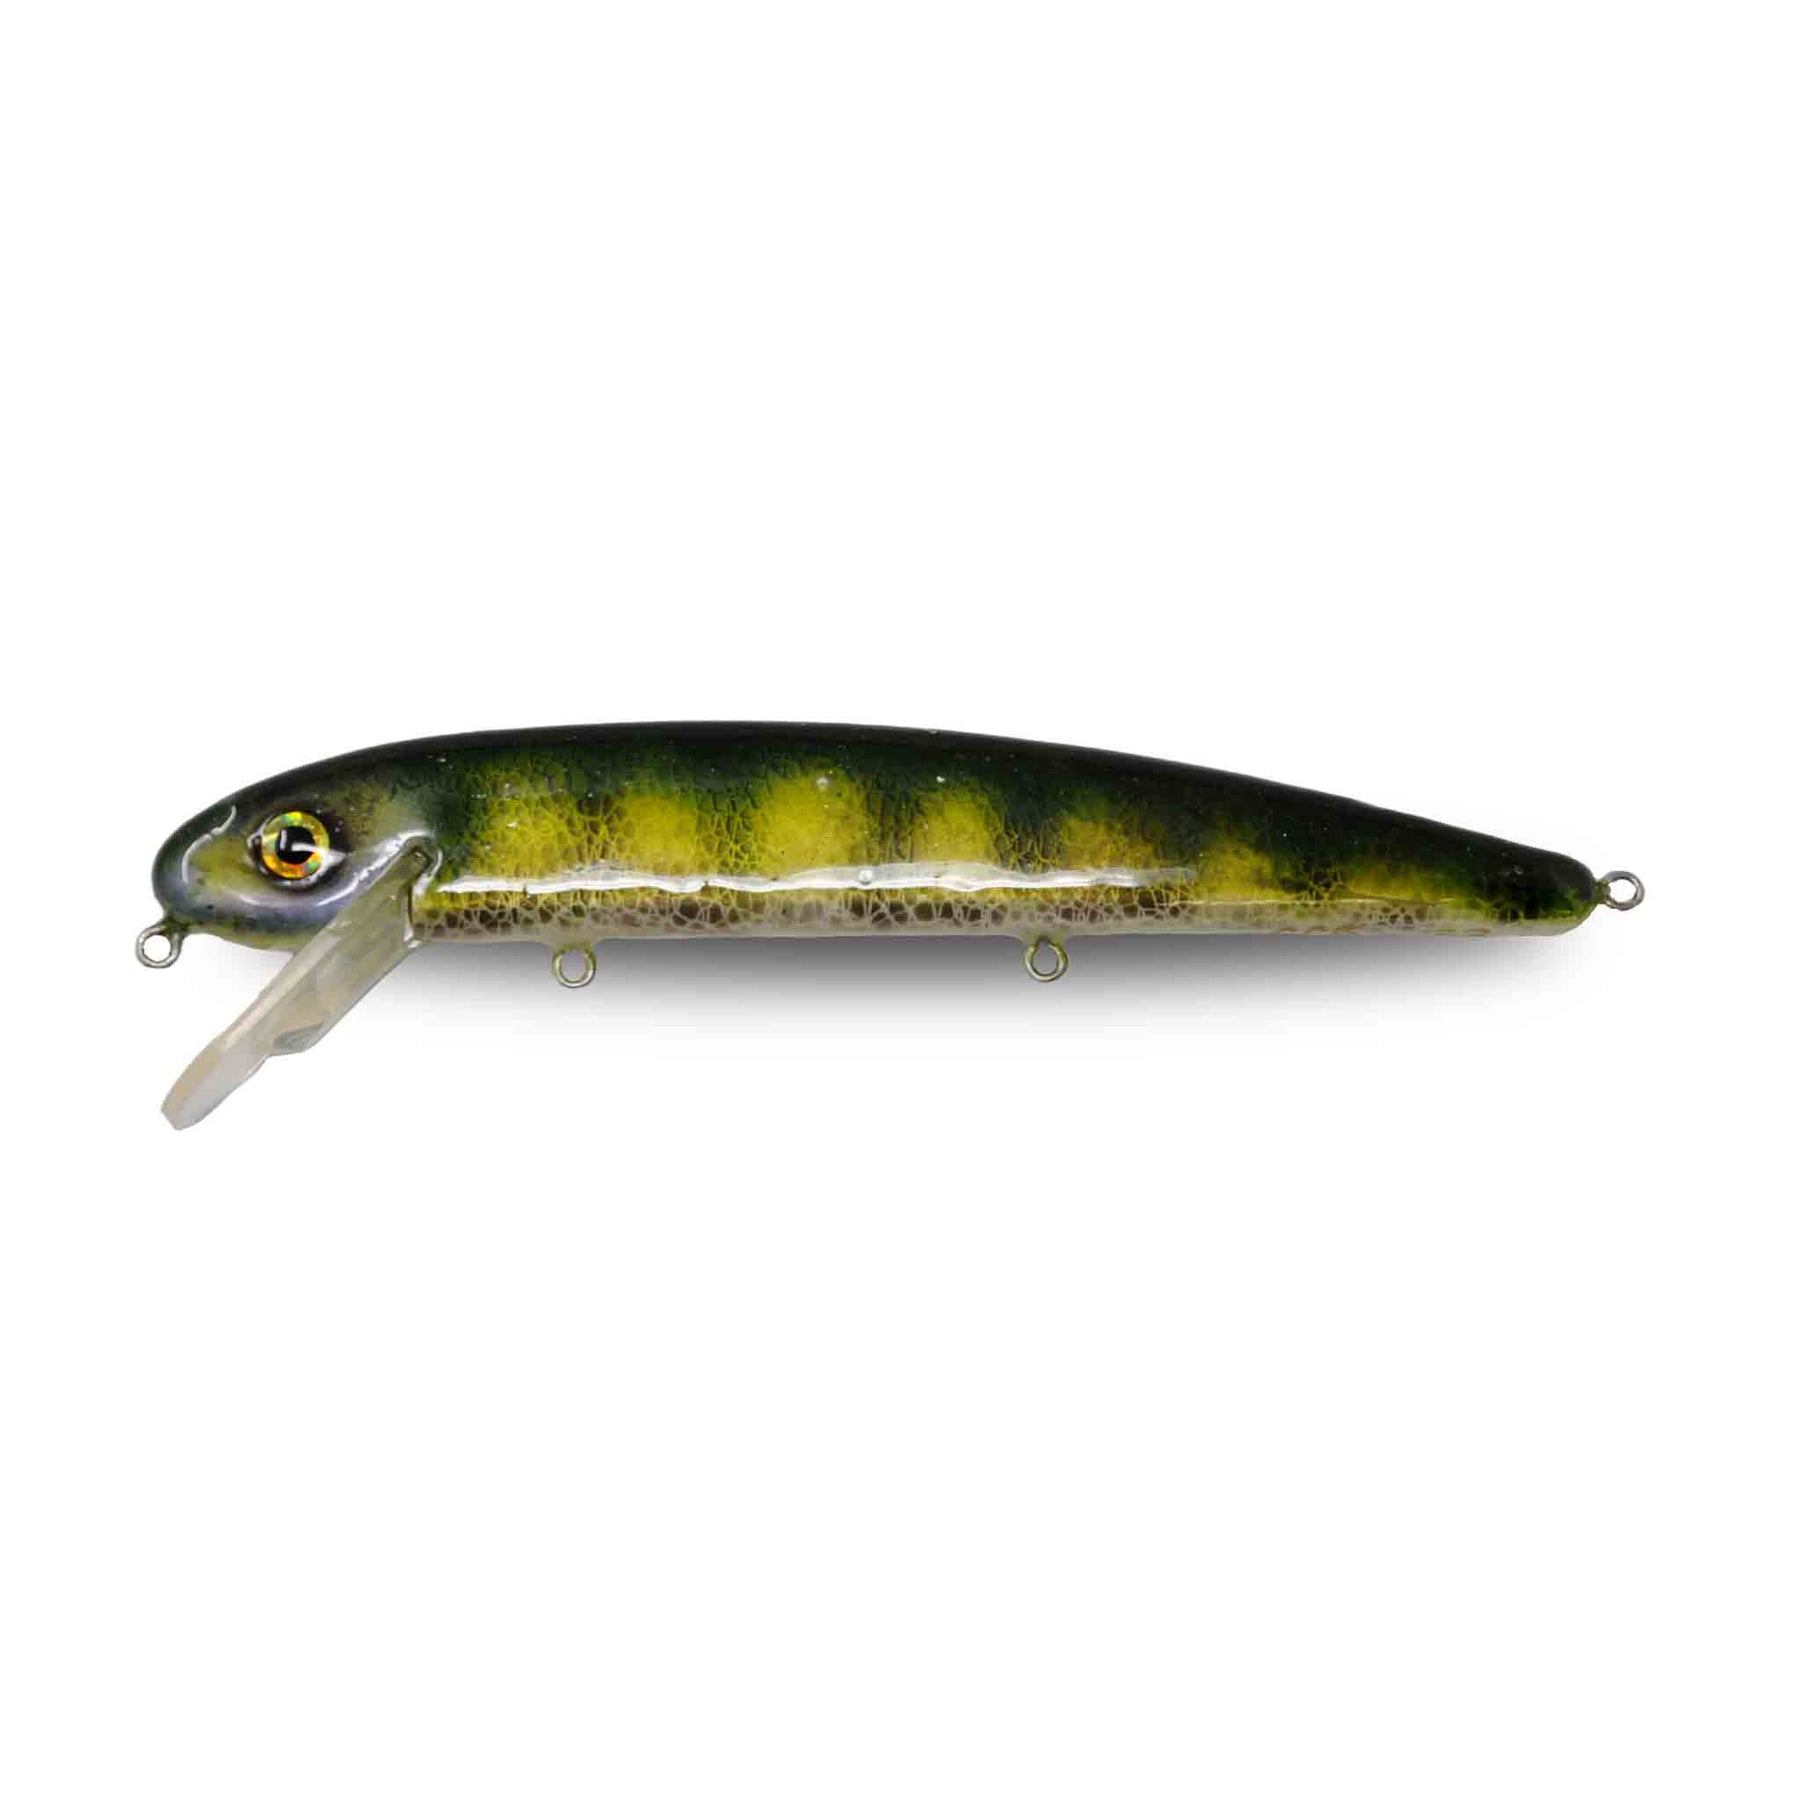 View of Crankbaits Capital Predator Bait Jake Custom Color Crankbait Black Crappie available at EZOKO Pike and Musky Shop